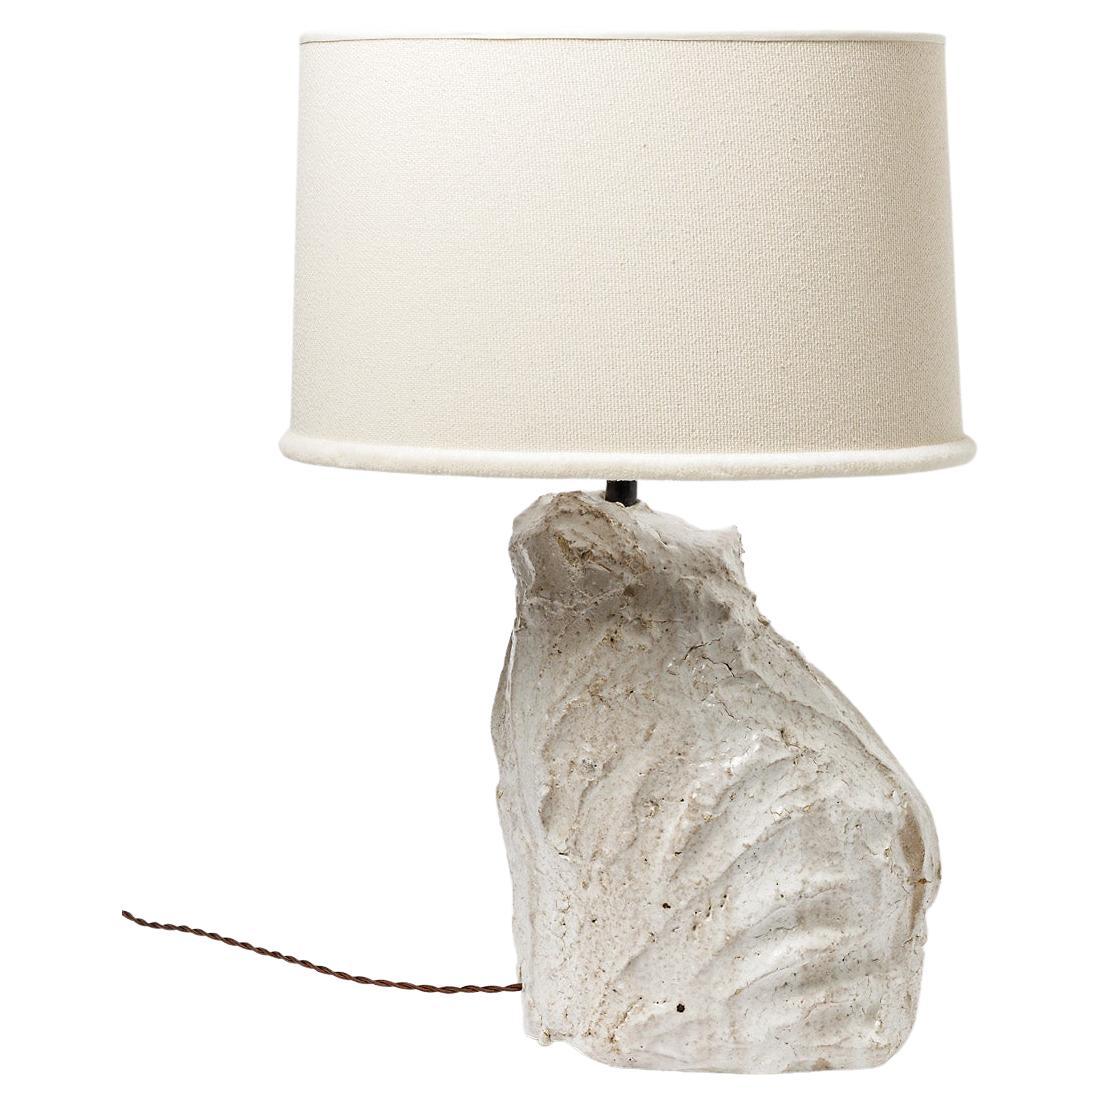 A ceramic table lamp with white glaze by Hervé Rousseau, 2022 / REF 5 For Sale